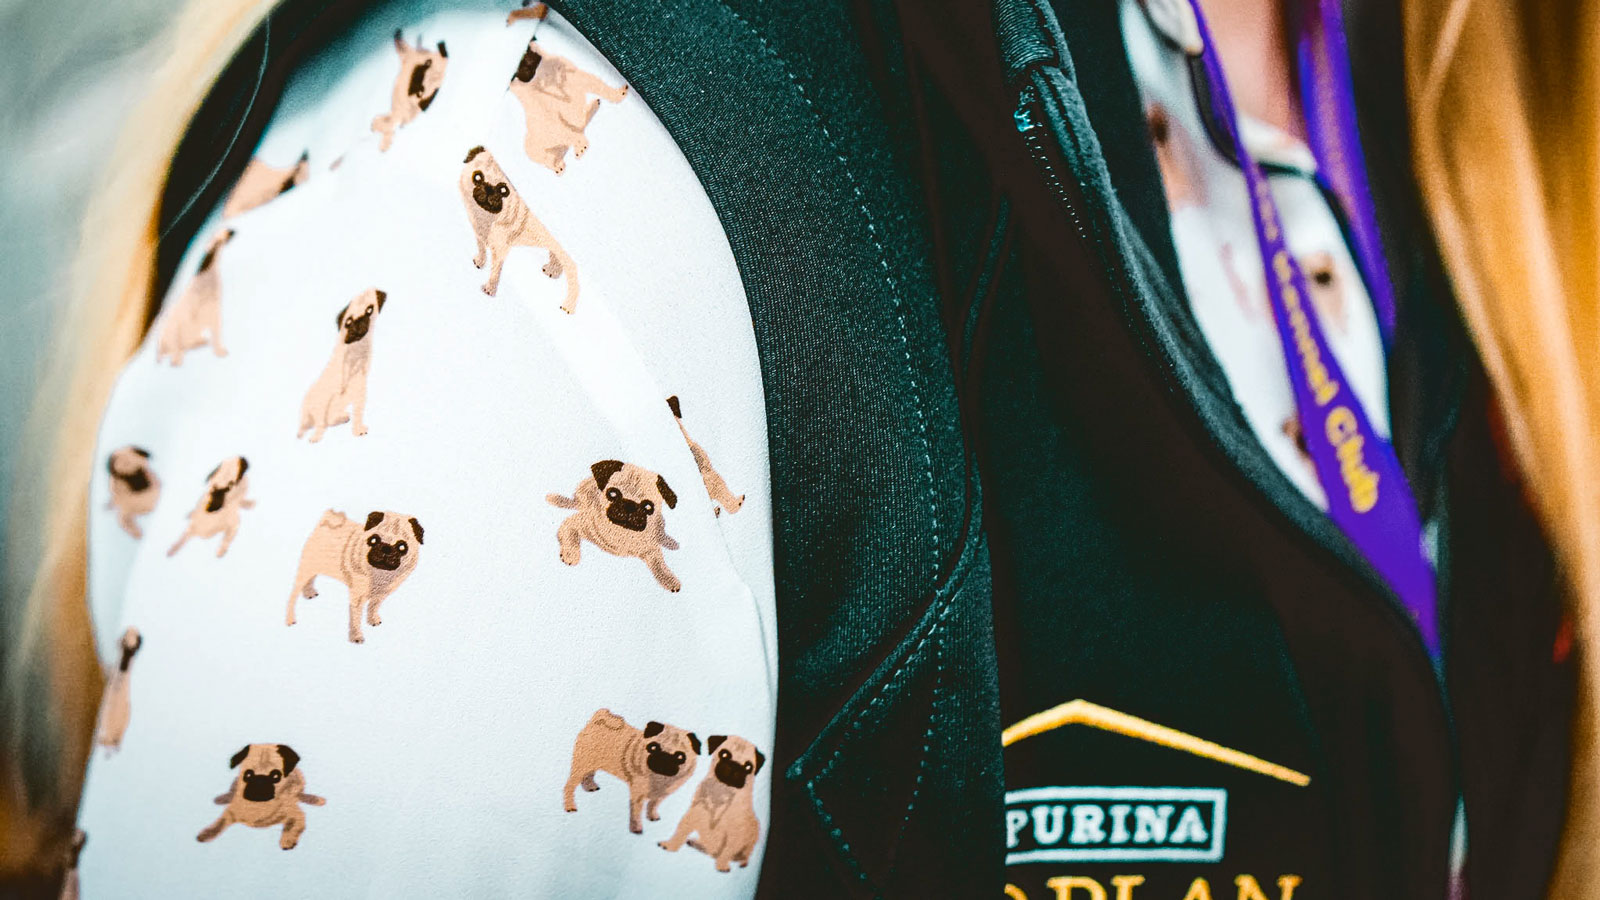 A woman's shoulder showing a shirt with a design of pug dogs